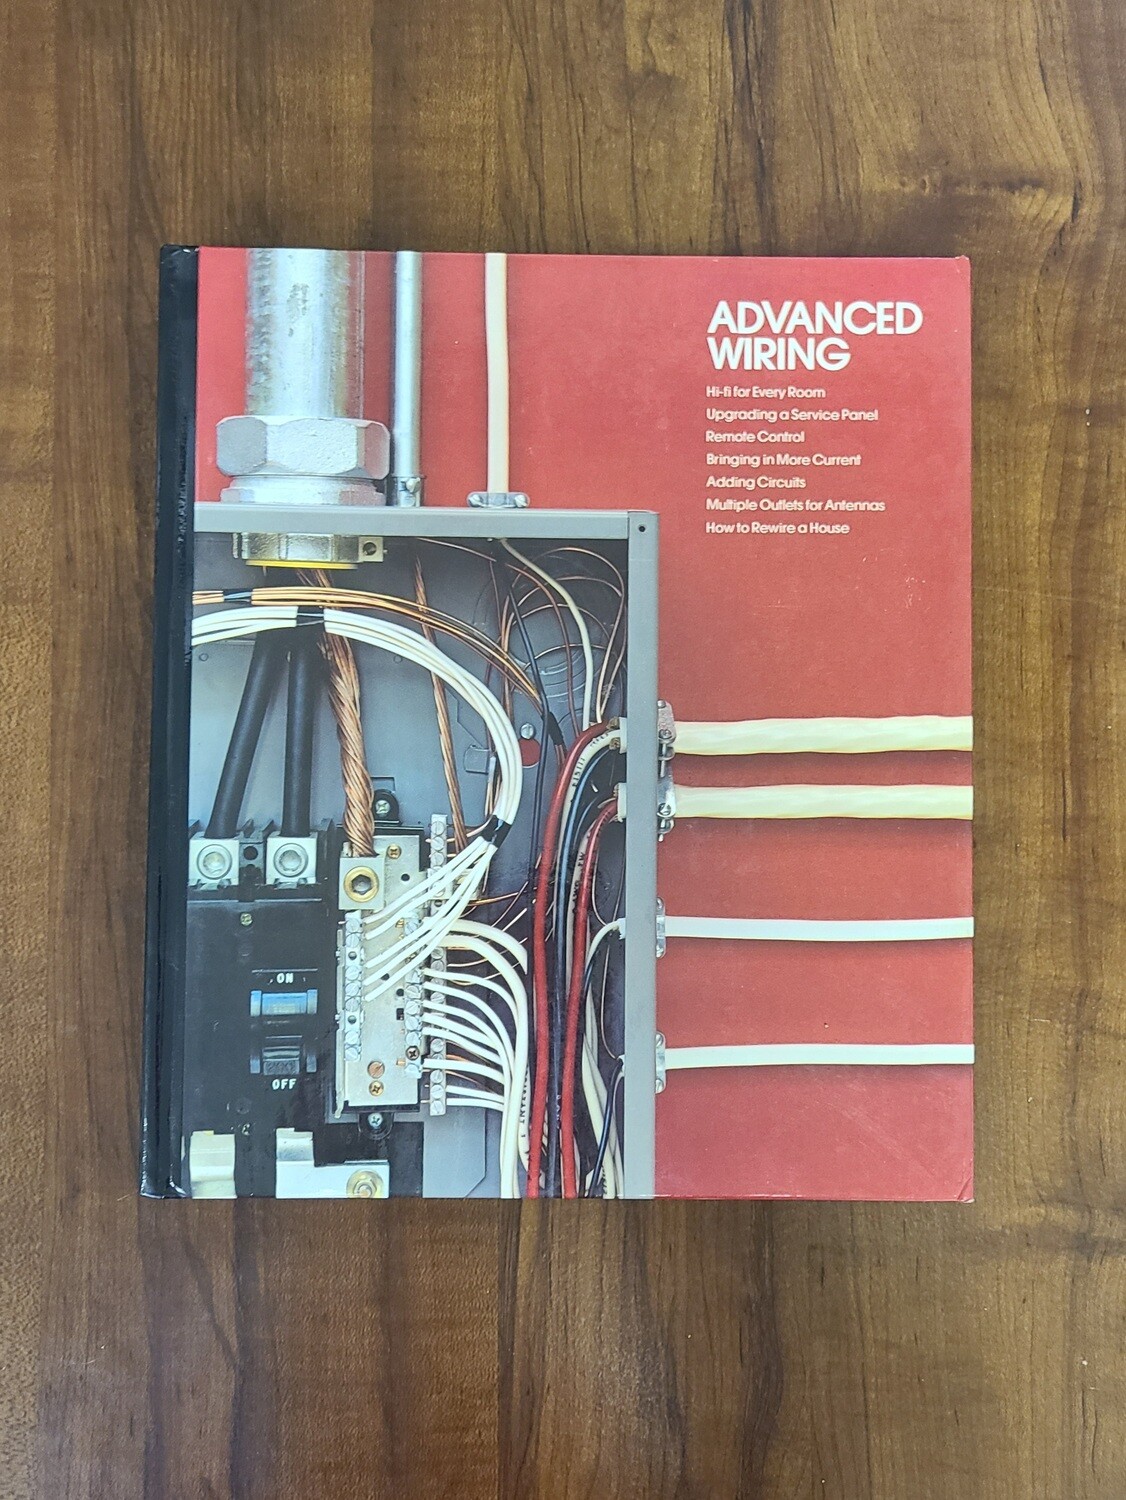 Advanced Wiring by Editors of Time-Life Books